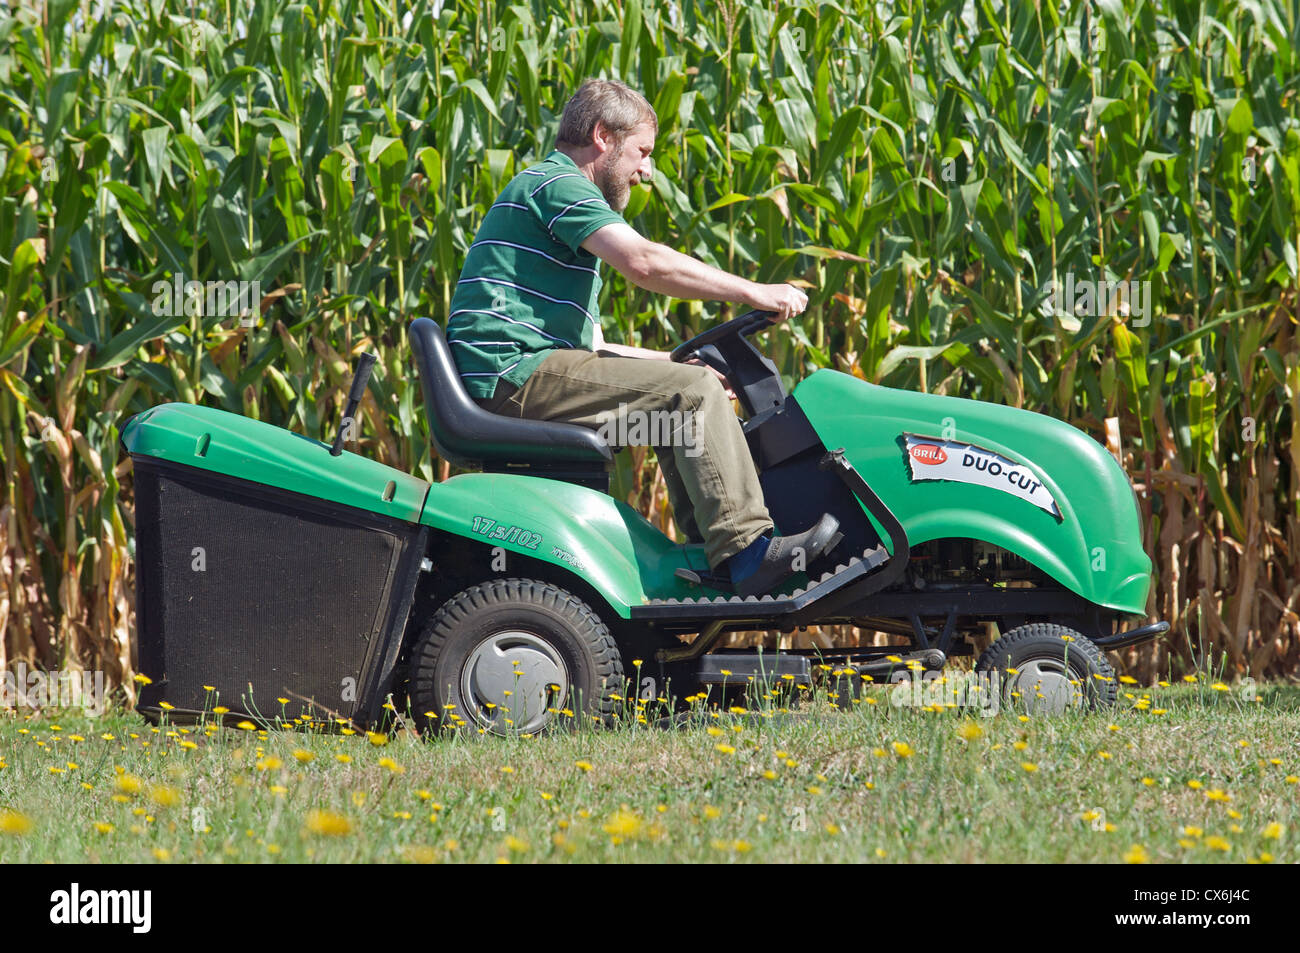 Man cutting lawn on ride-on mower close to agricultural field growing maize Stock Photo